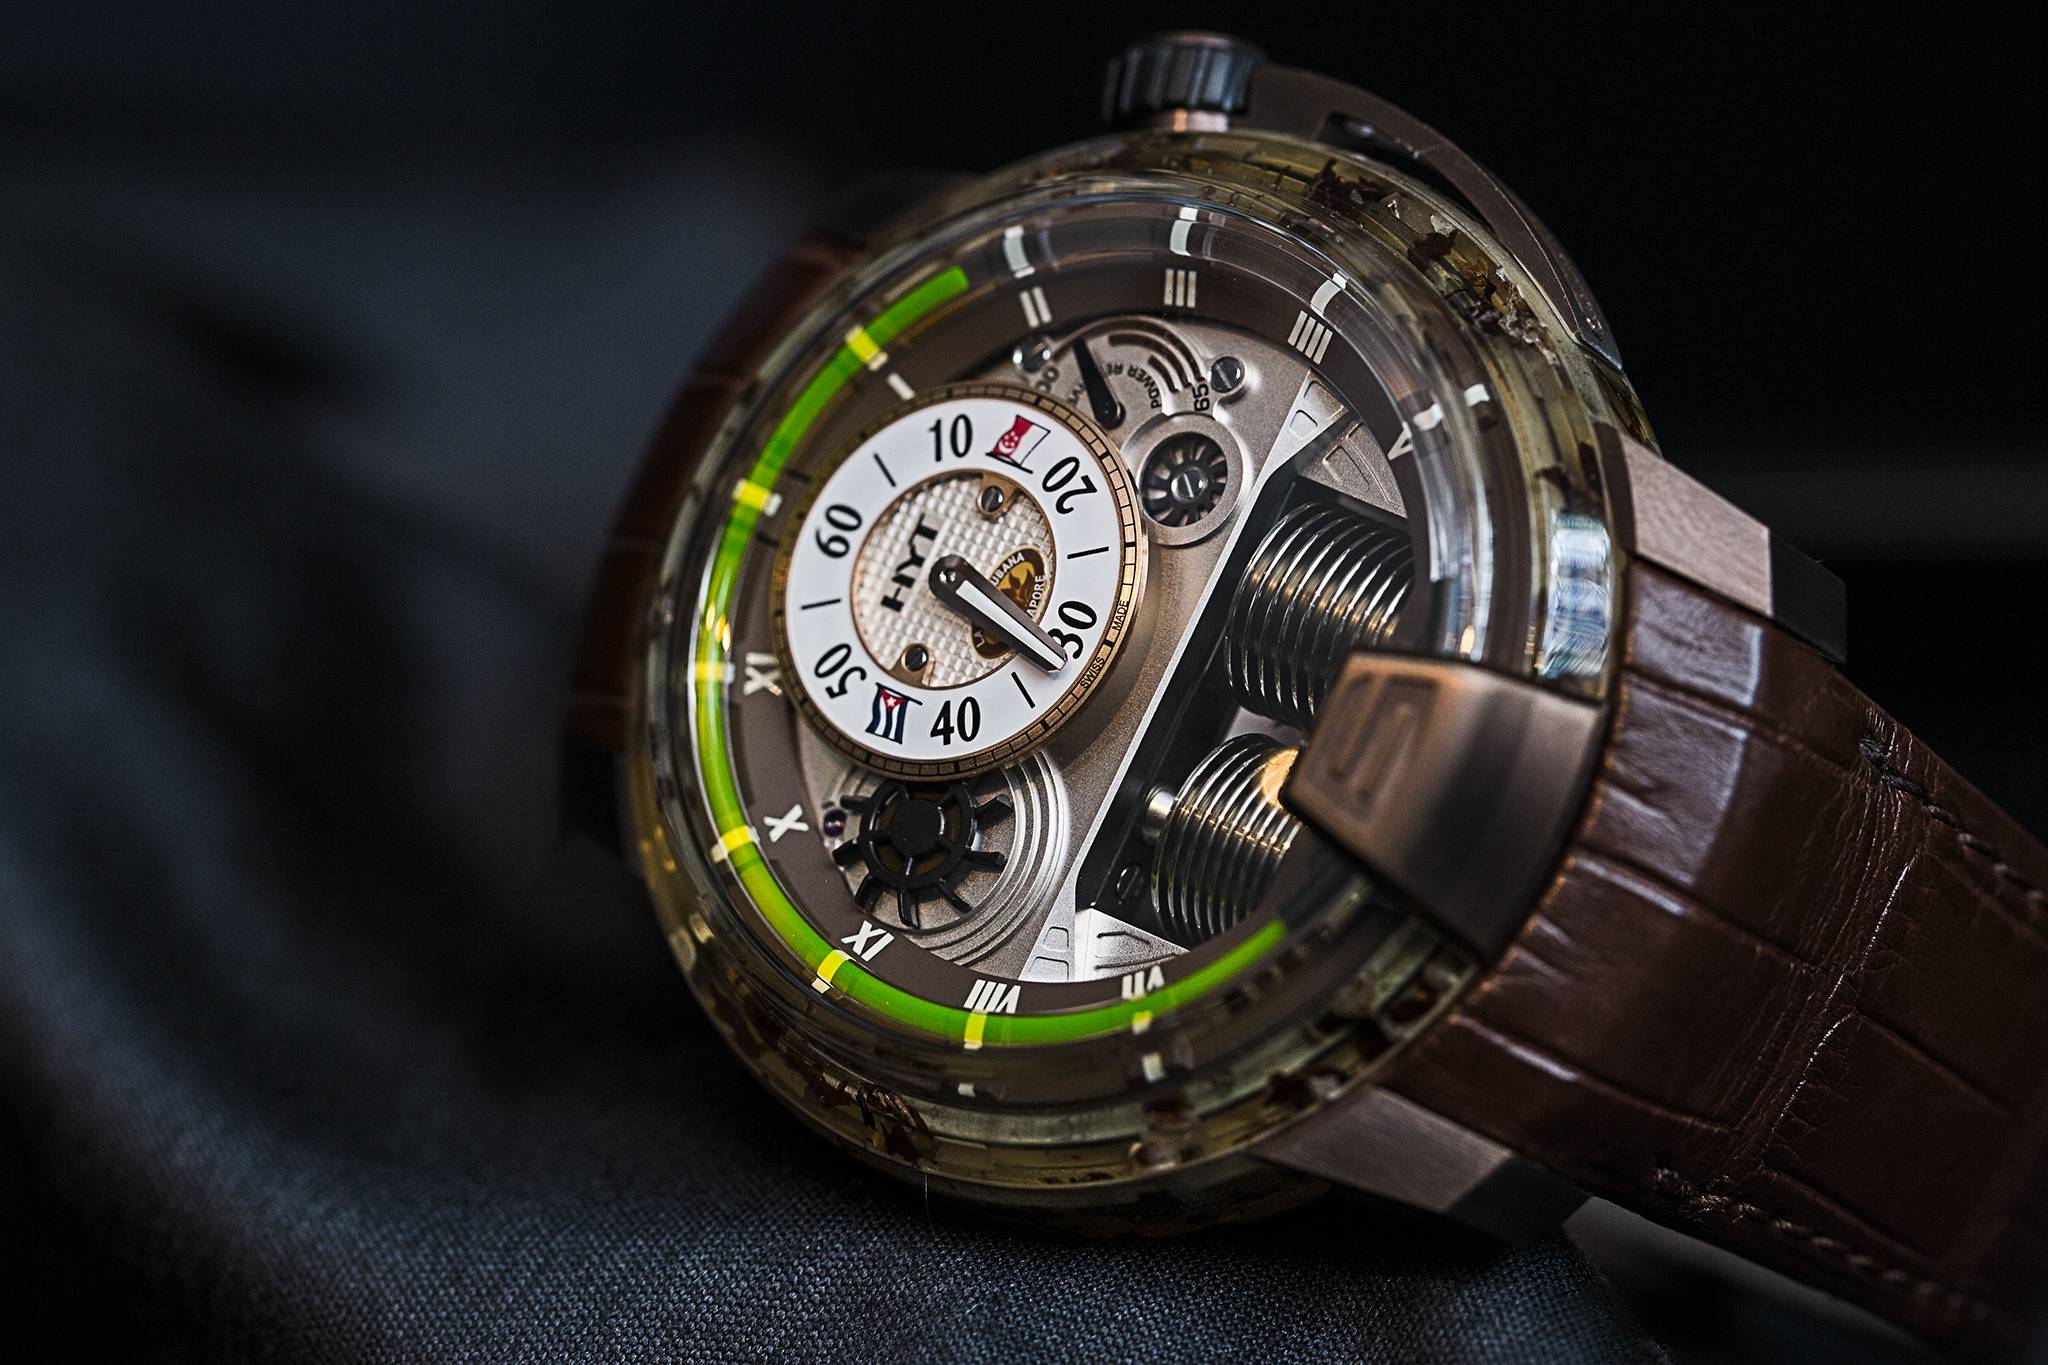 Hands On The Limited Edition HYT H1 Cigar, The Holy Smoke Watch Of Baselworld